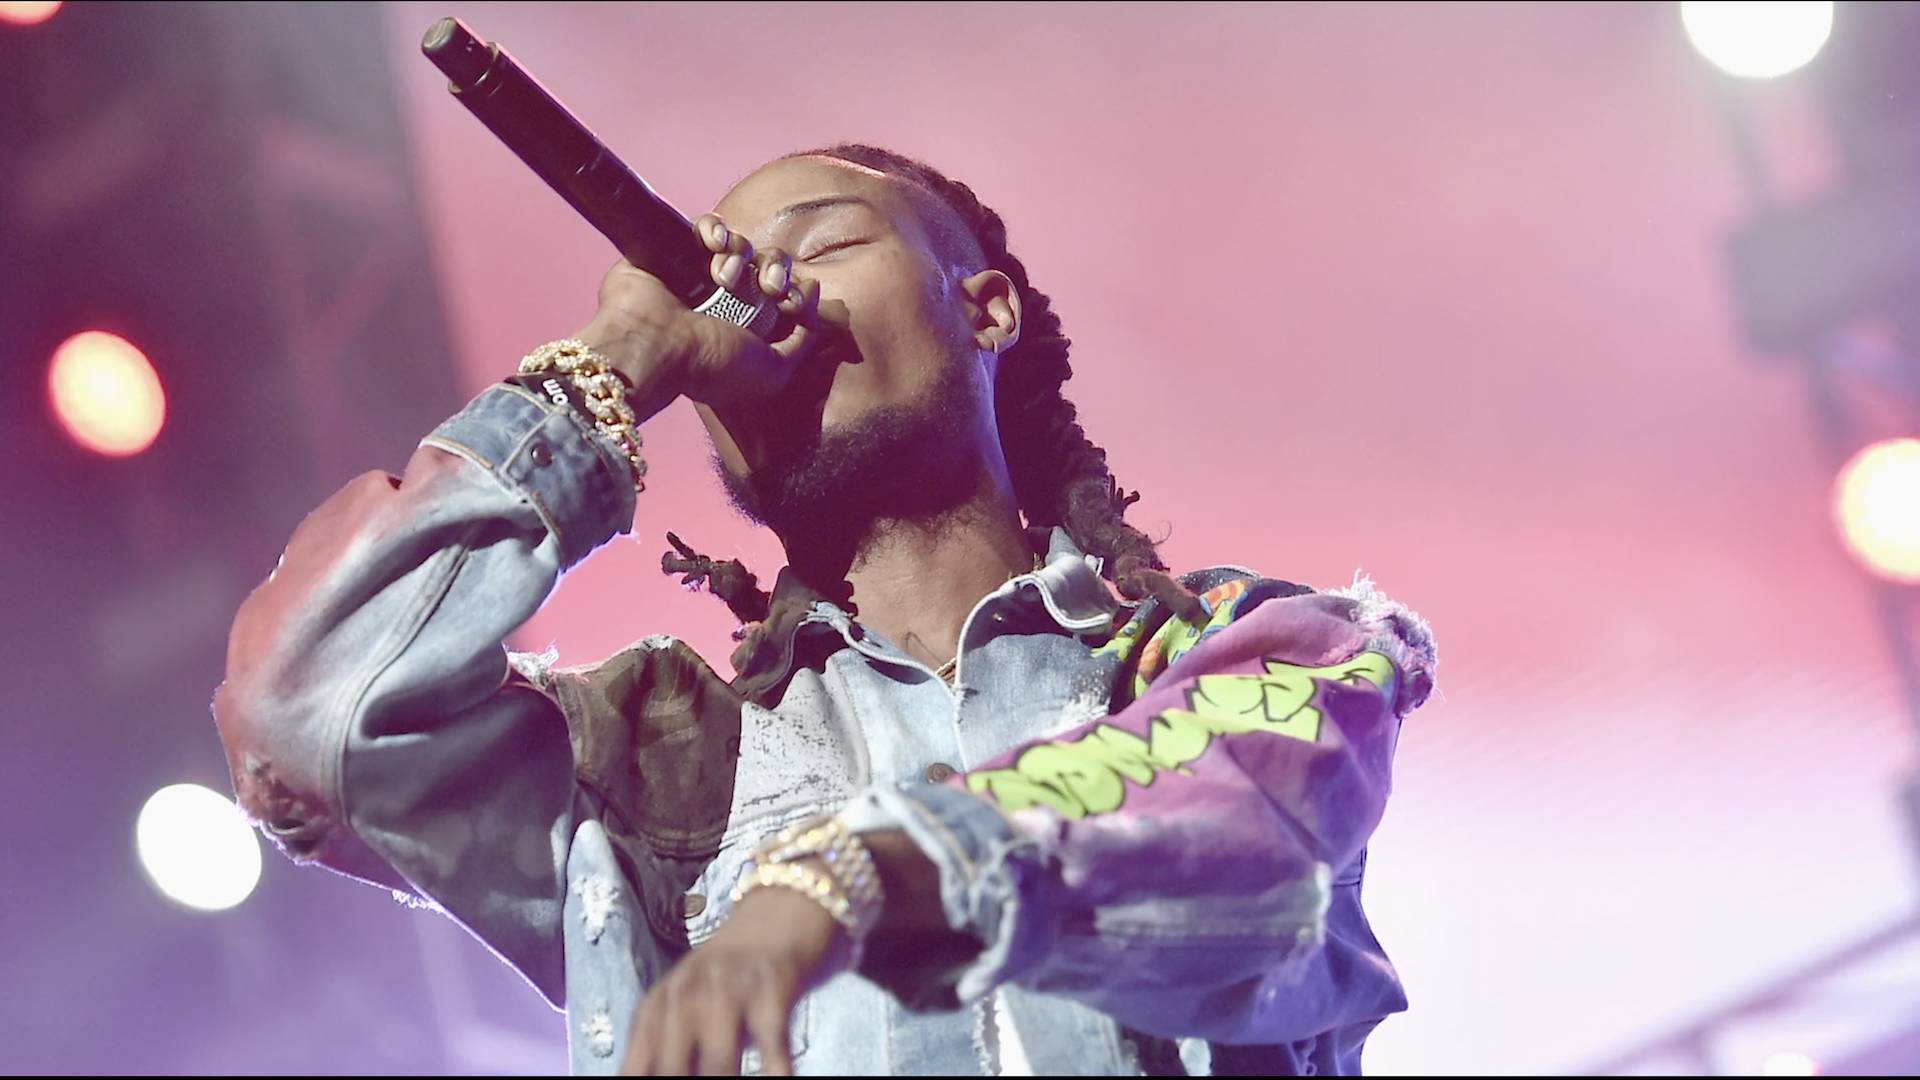 Rapper Future on stage performing in a multi-colored shirt.